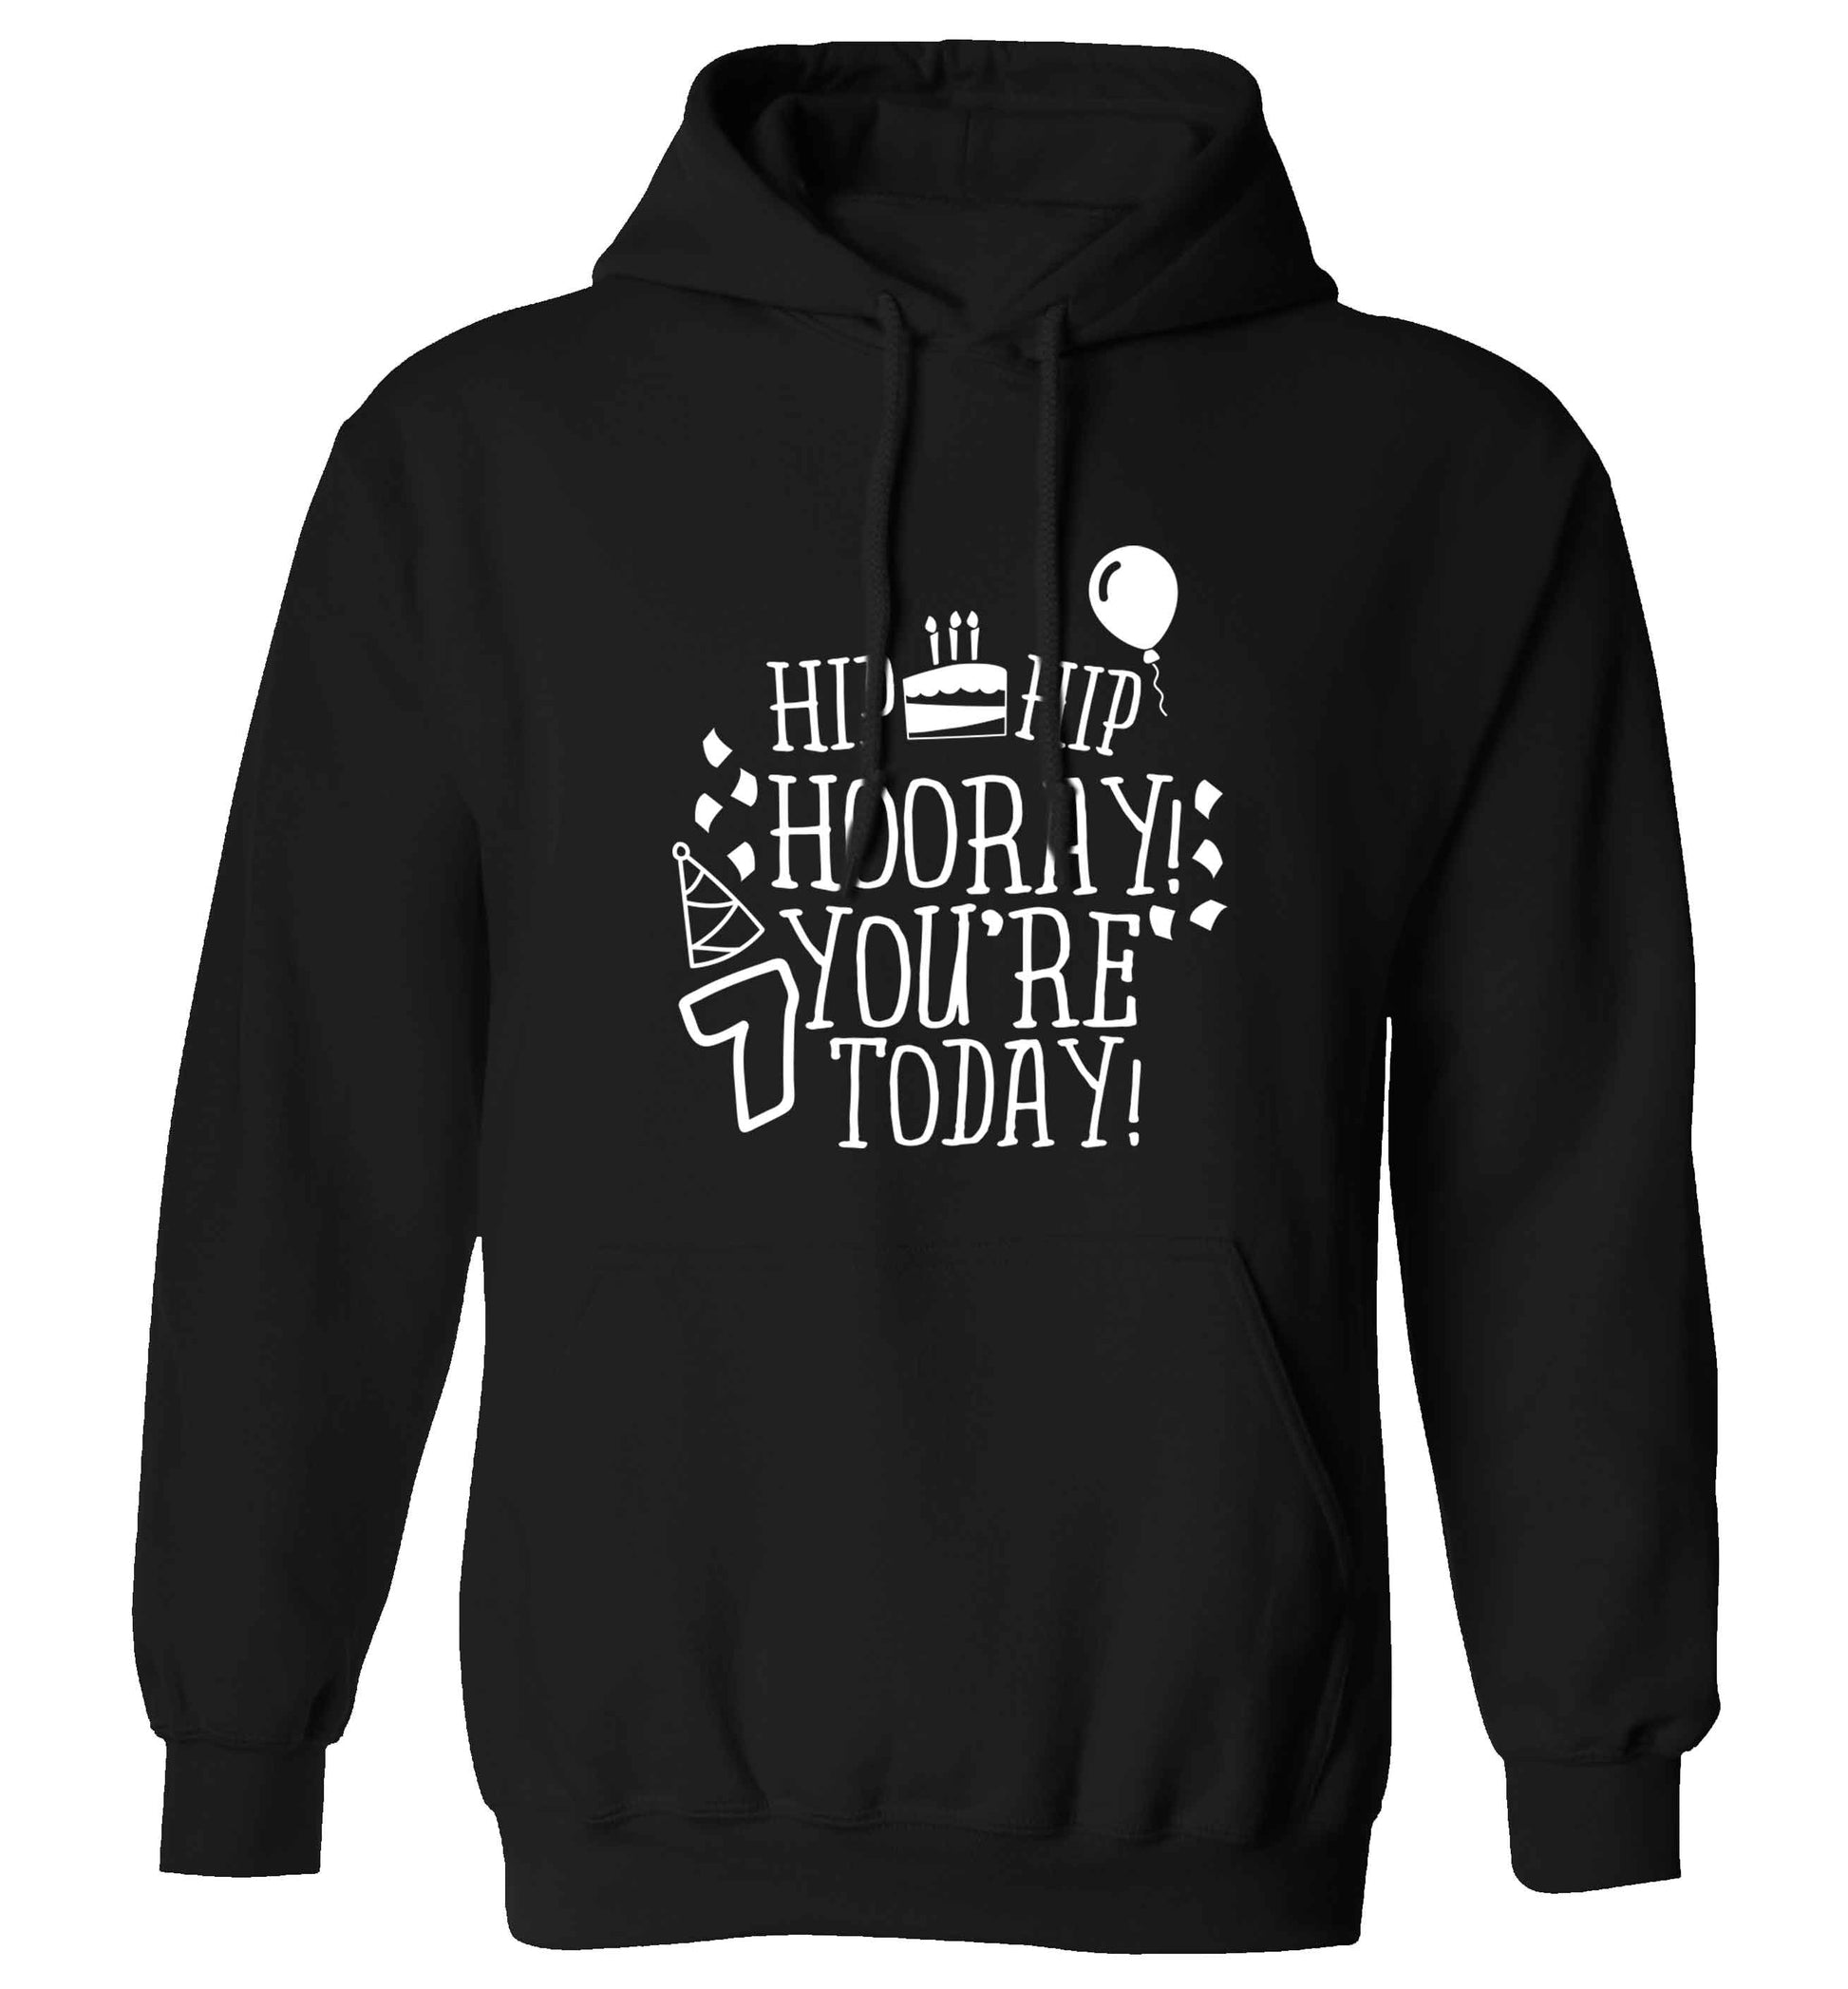 Hip hip hooray you're seven today! adults unisex black hoodie 2XL